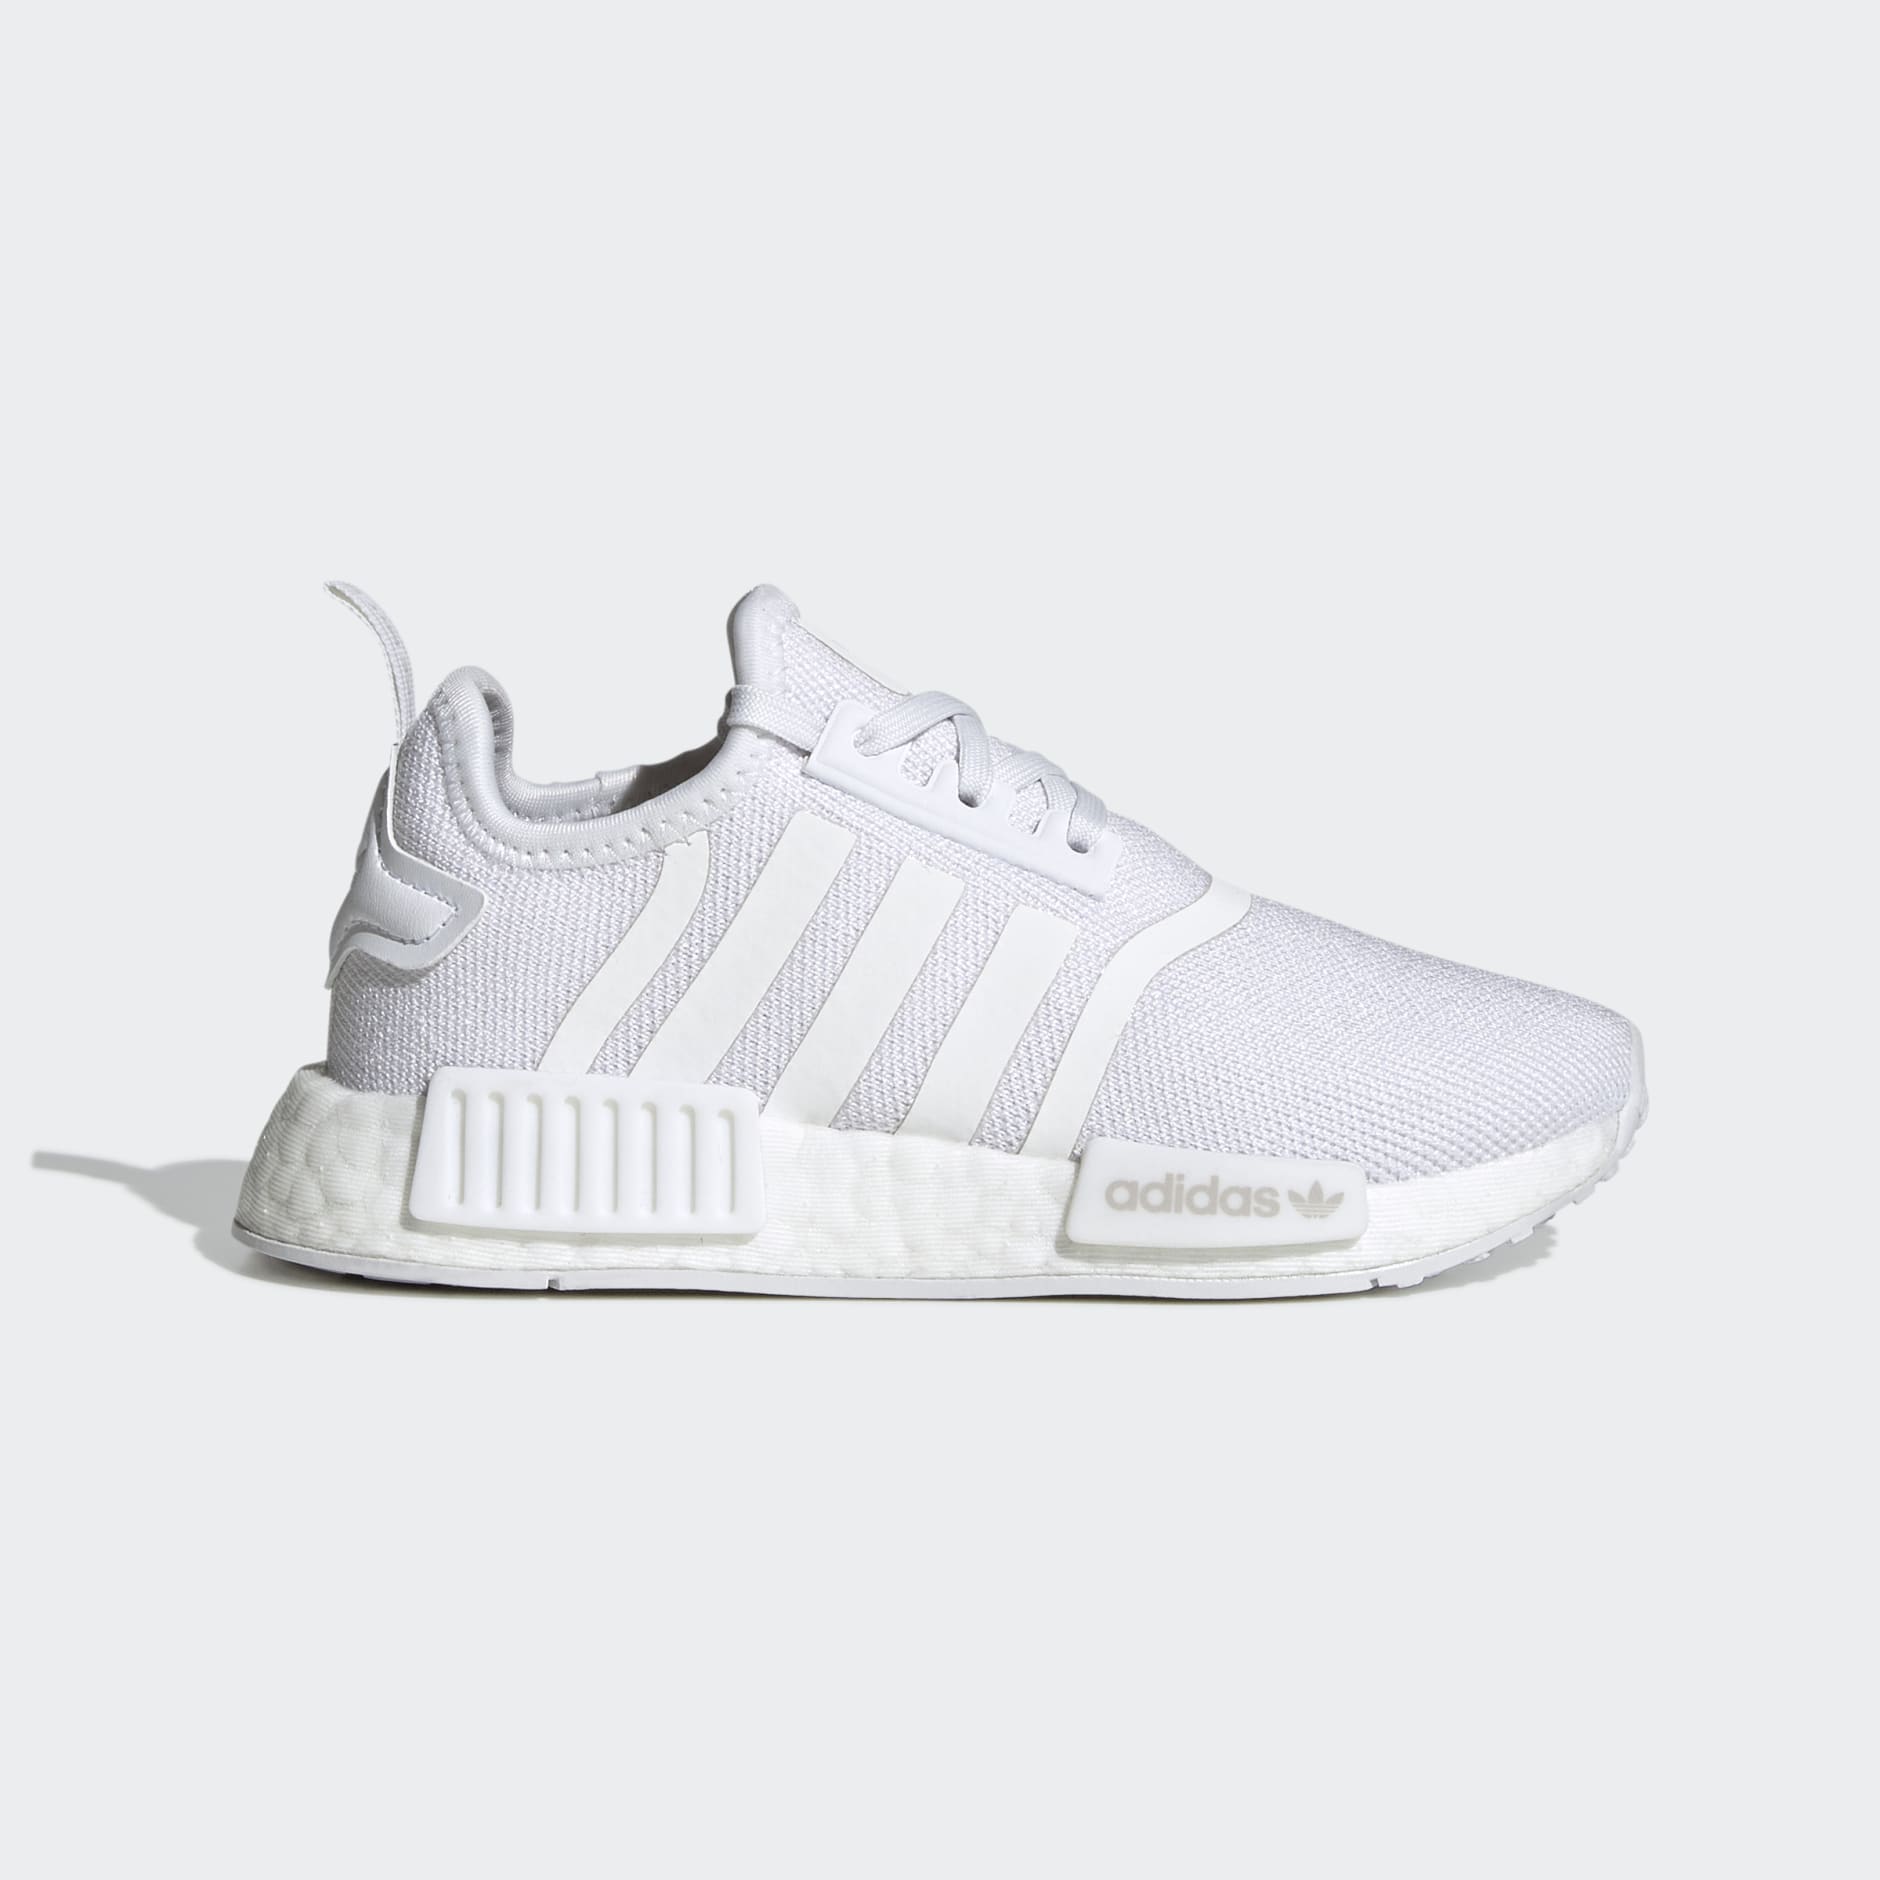 adidas NMD_R1 Refined Shoes - White | adidas IL